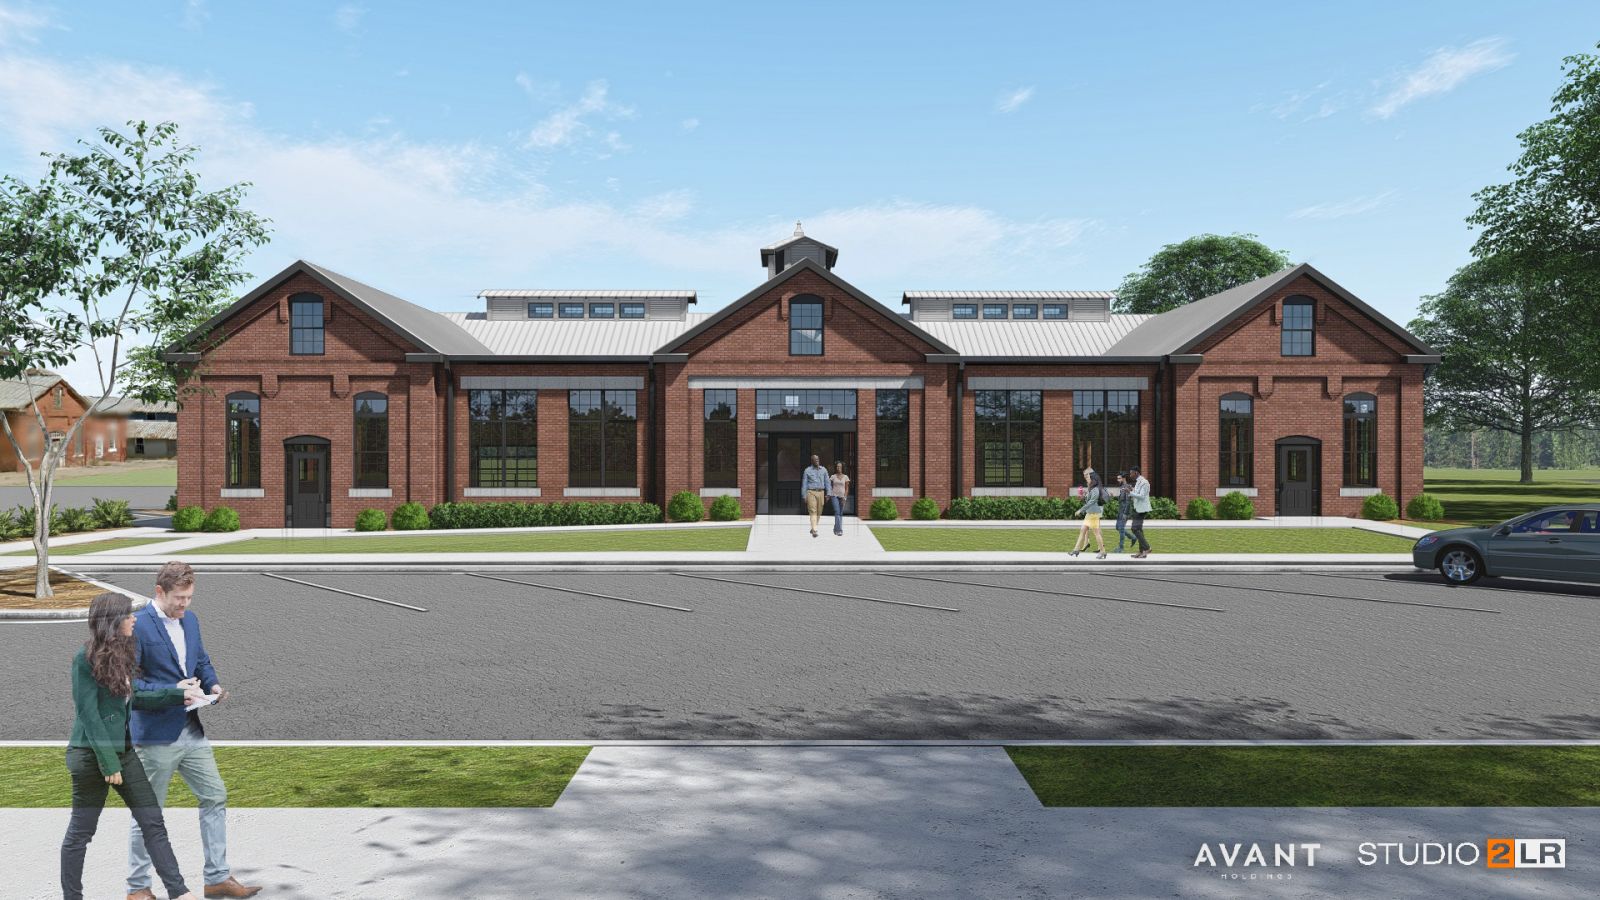 The Laundry Building, the oldest service building on the BullStreet campus, has undergone renovations overseen by Avant Holdings and is expected to be ready for retail and/or commercial tenants by the end of the year. (Rendering/Provided)